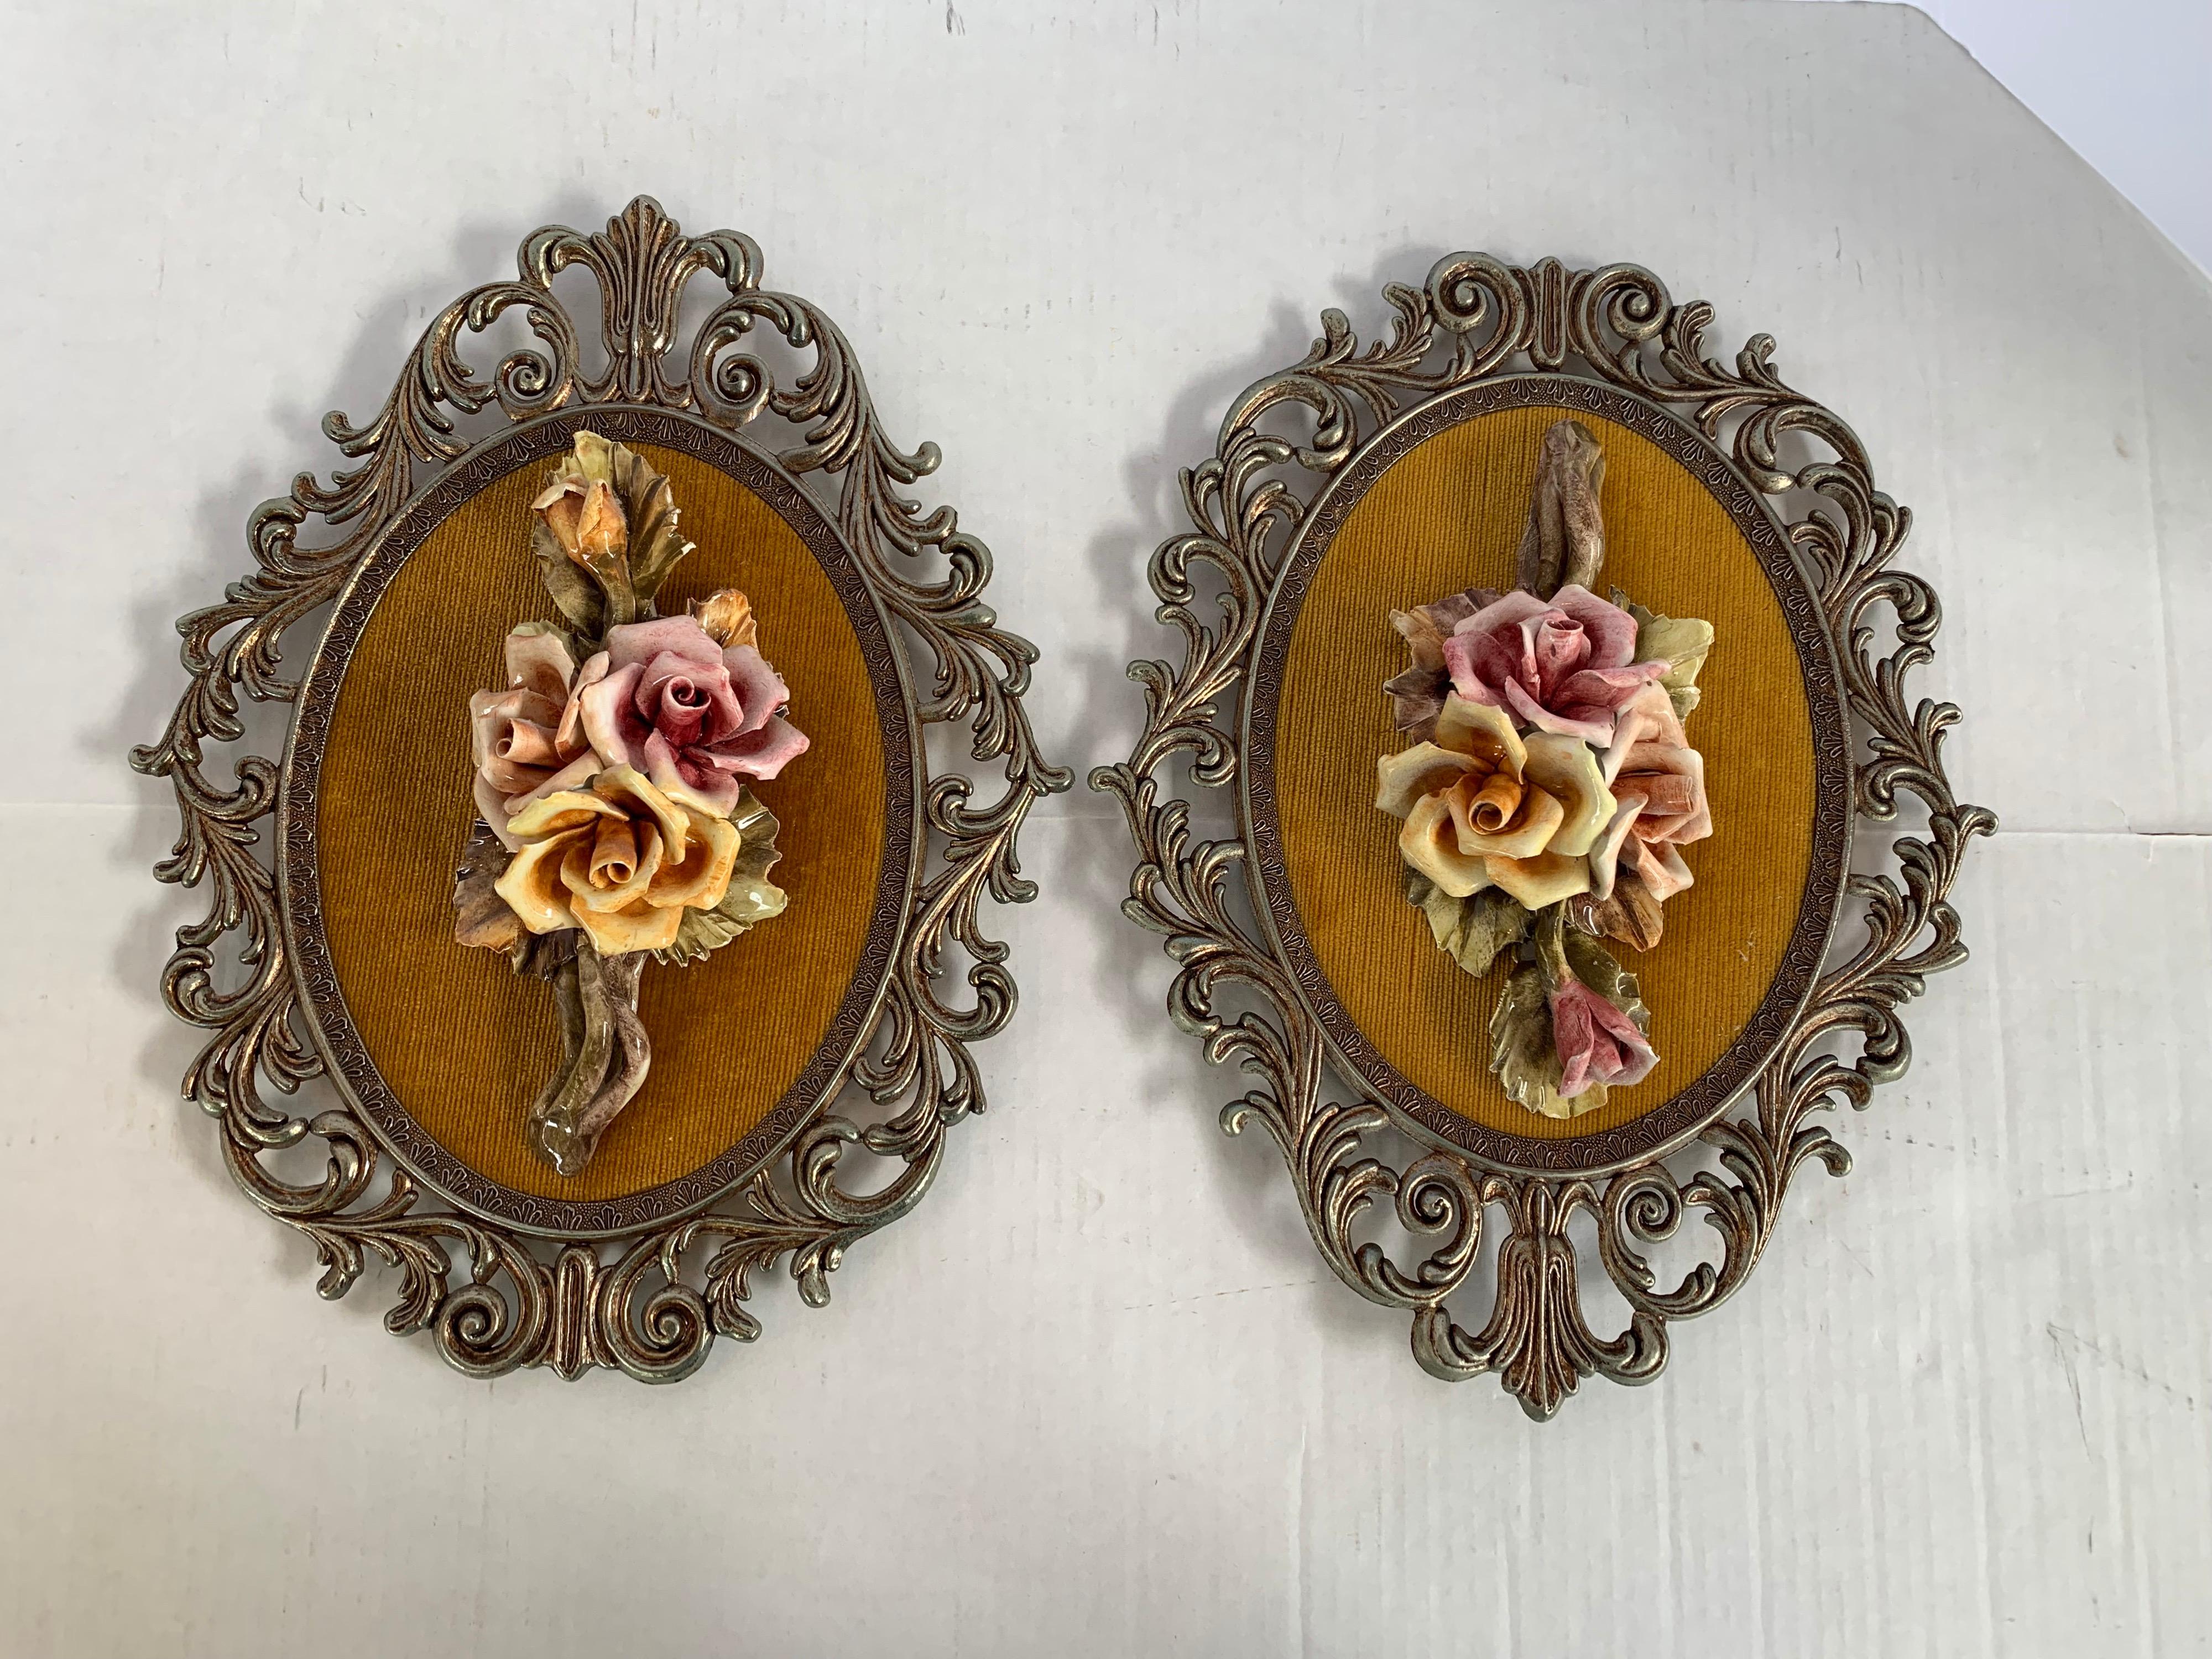 Italian Raised Porcelain Medallions in Frames, a Pair Made in Italy